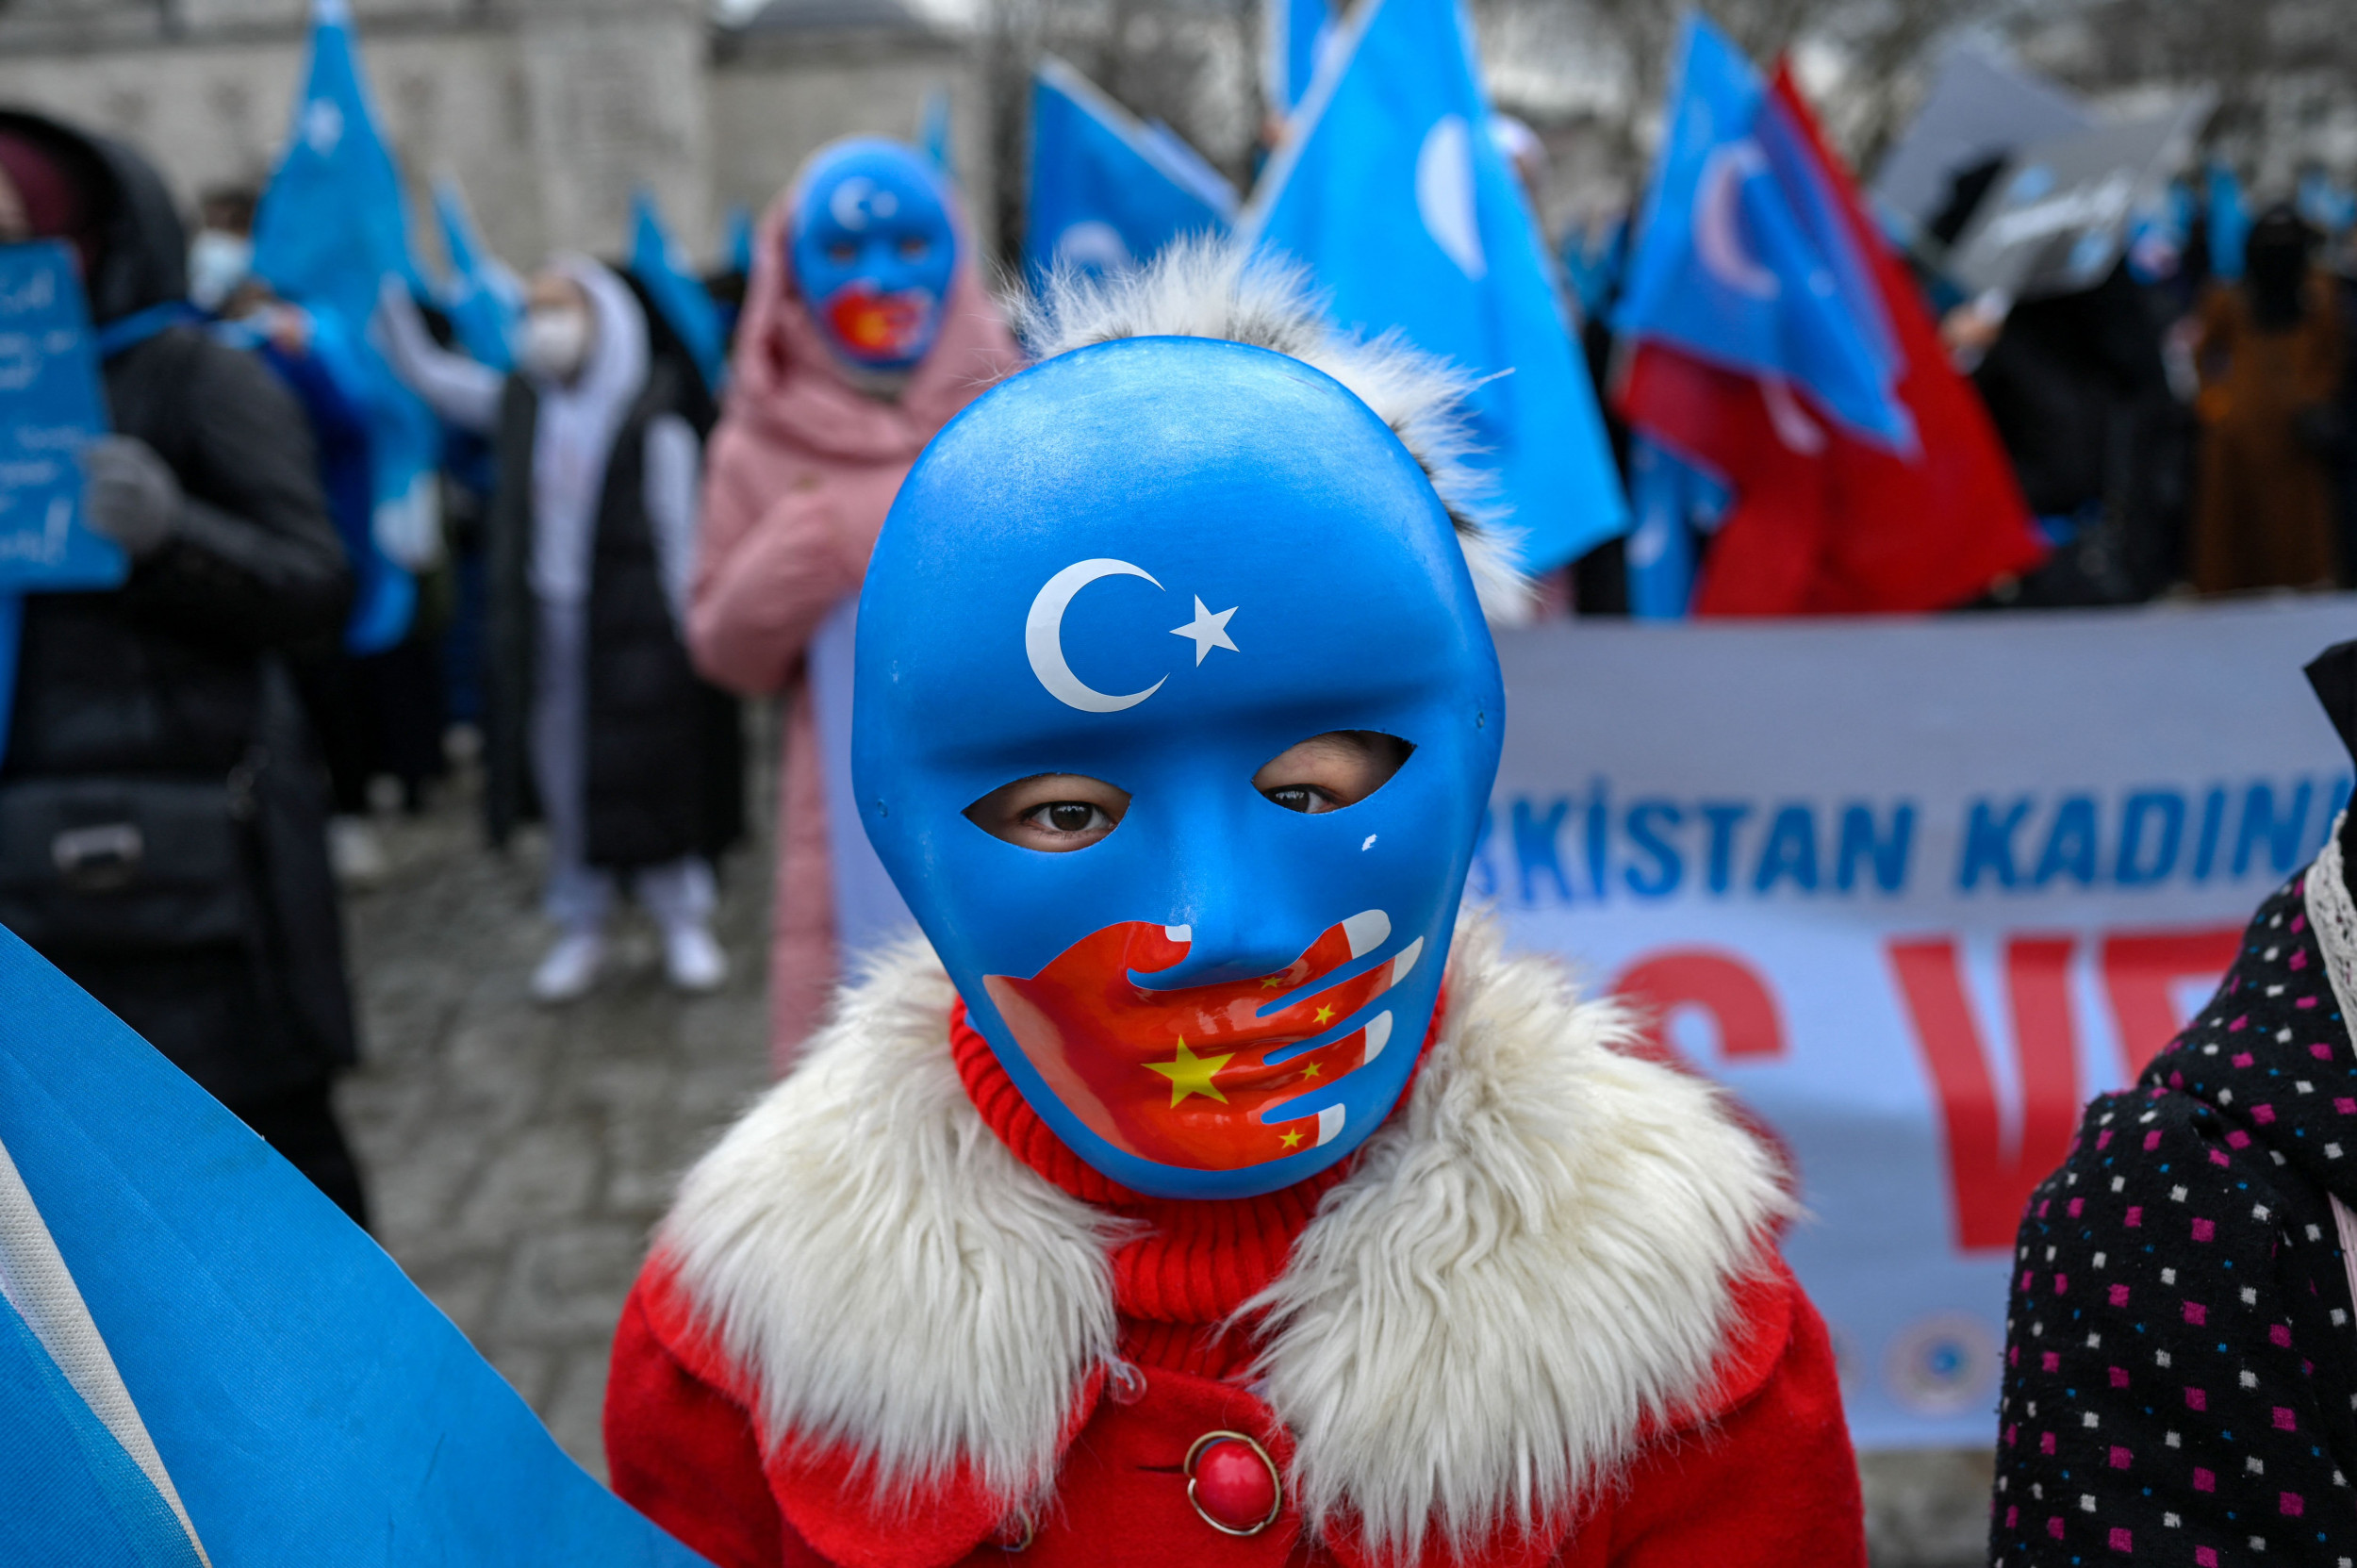 Break Their Lineage, Break Their Roots”: China's Crimes against Humanity  Targeting Uyghurs and Other Turkic Muslims